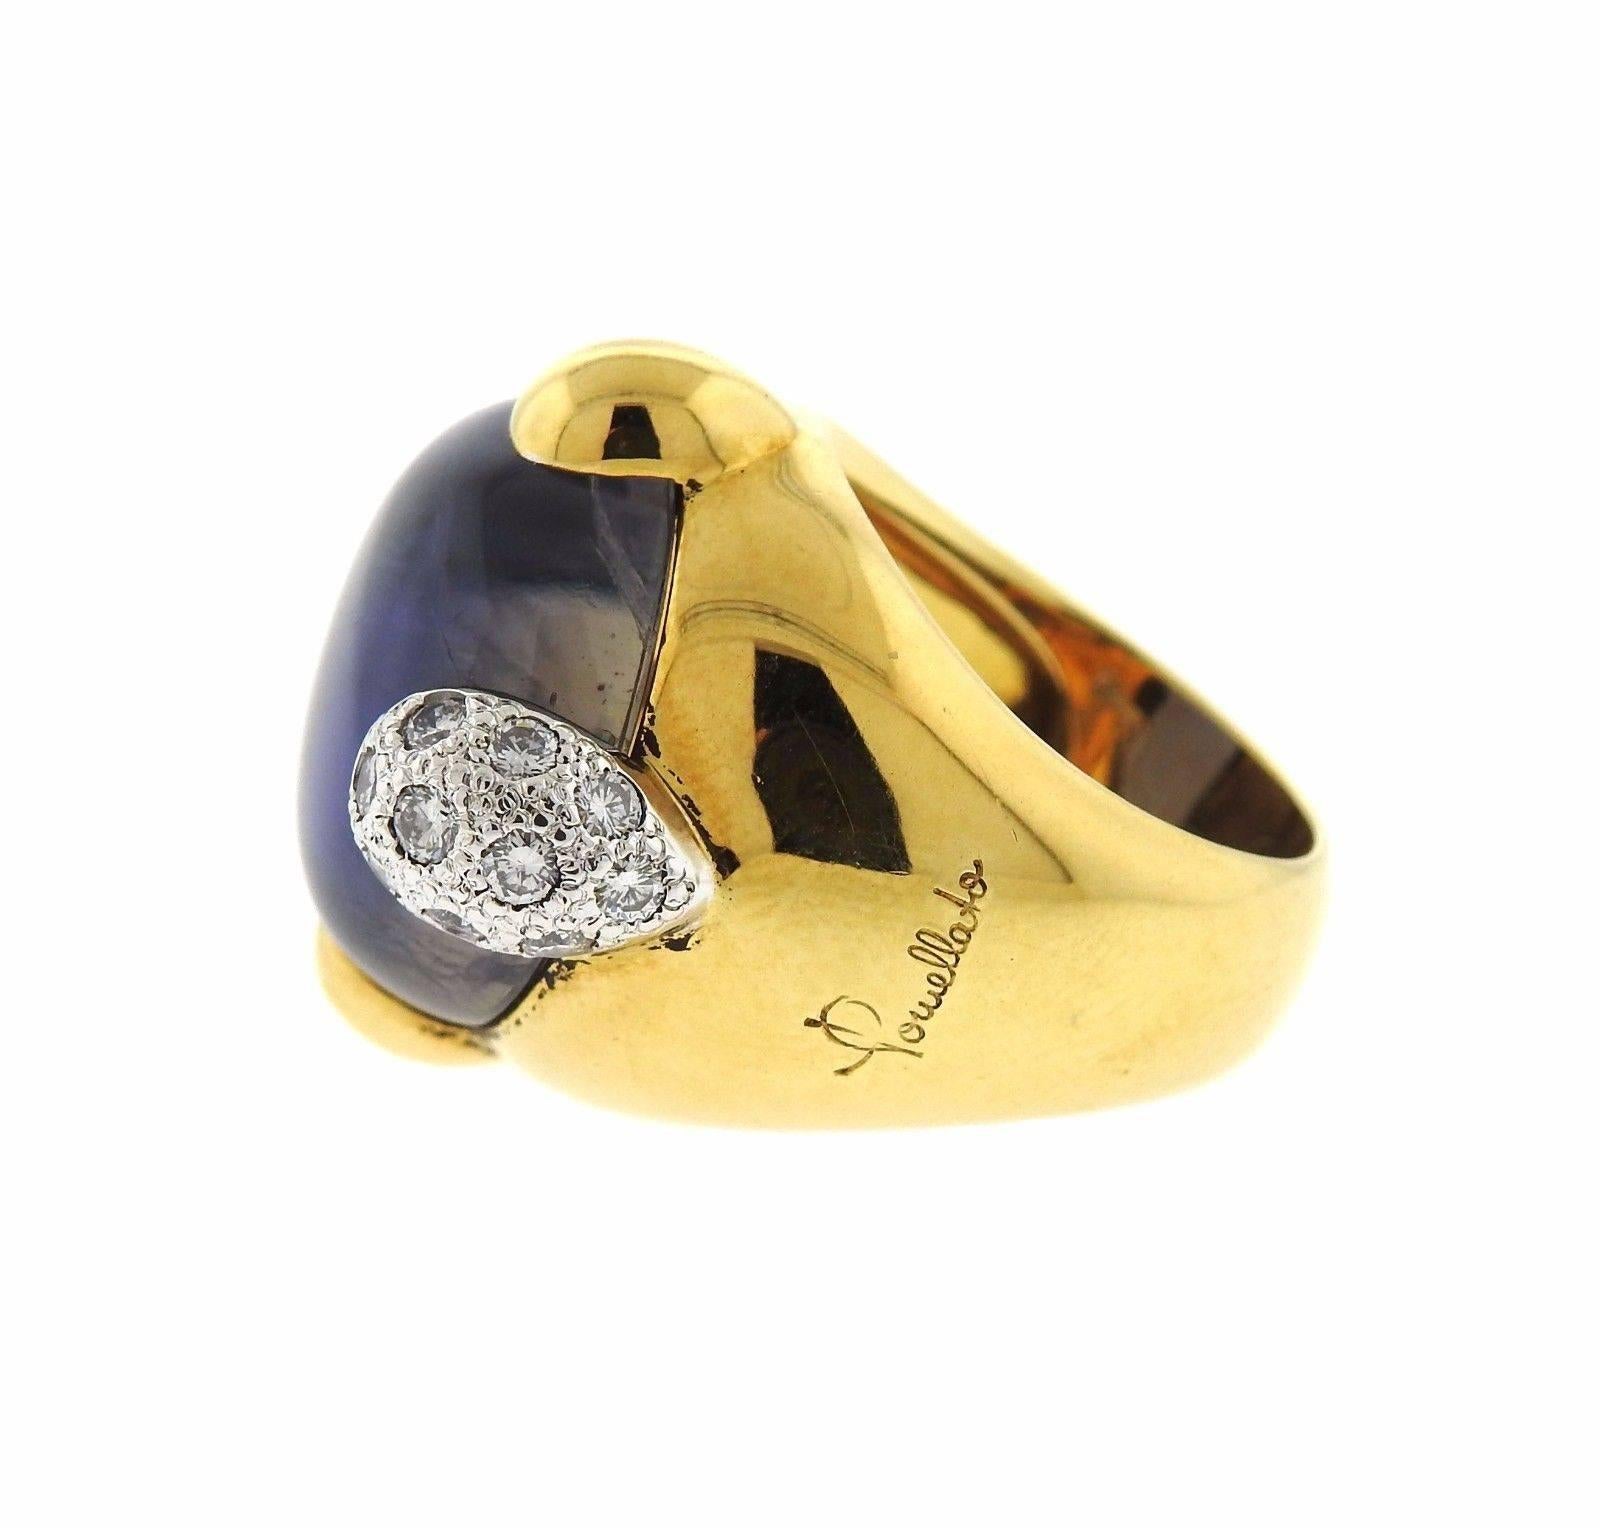 An 18k gold ring set with purple quartz.  The ring is a size 6 1/2 and the ring top is 23mm x 24mm.  The weight of the ring is 21.2 grams.  Marked: 750, Italian mark, Pomellato. The retail is $4500.